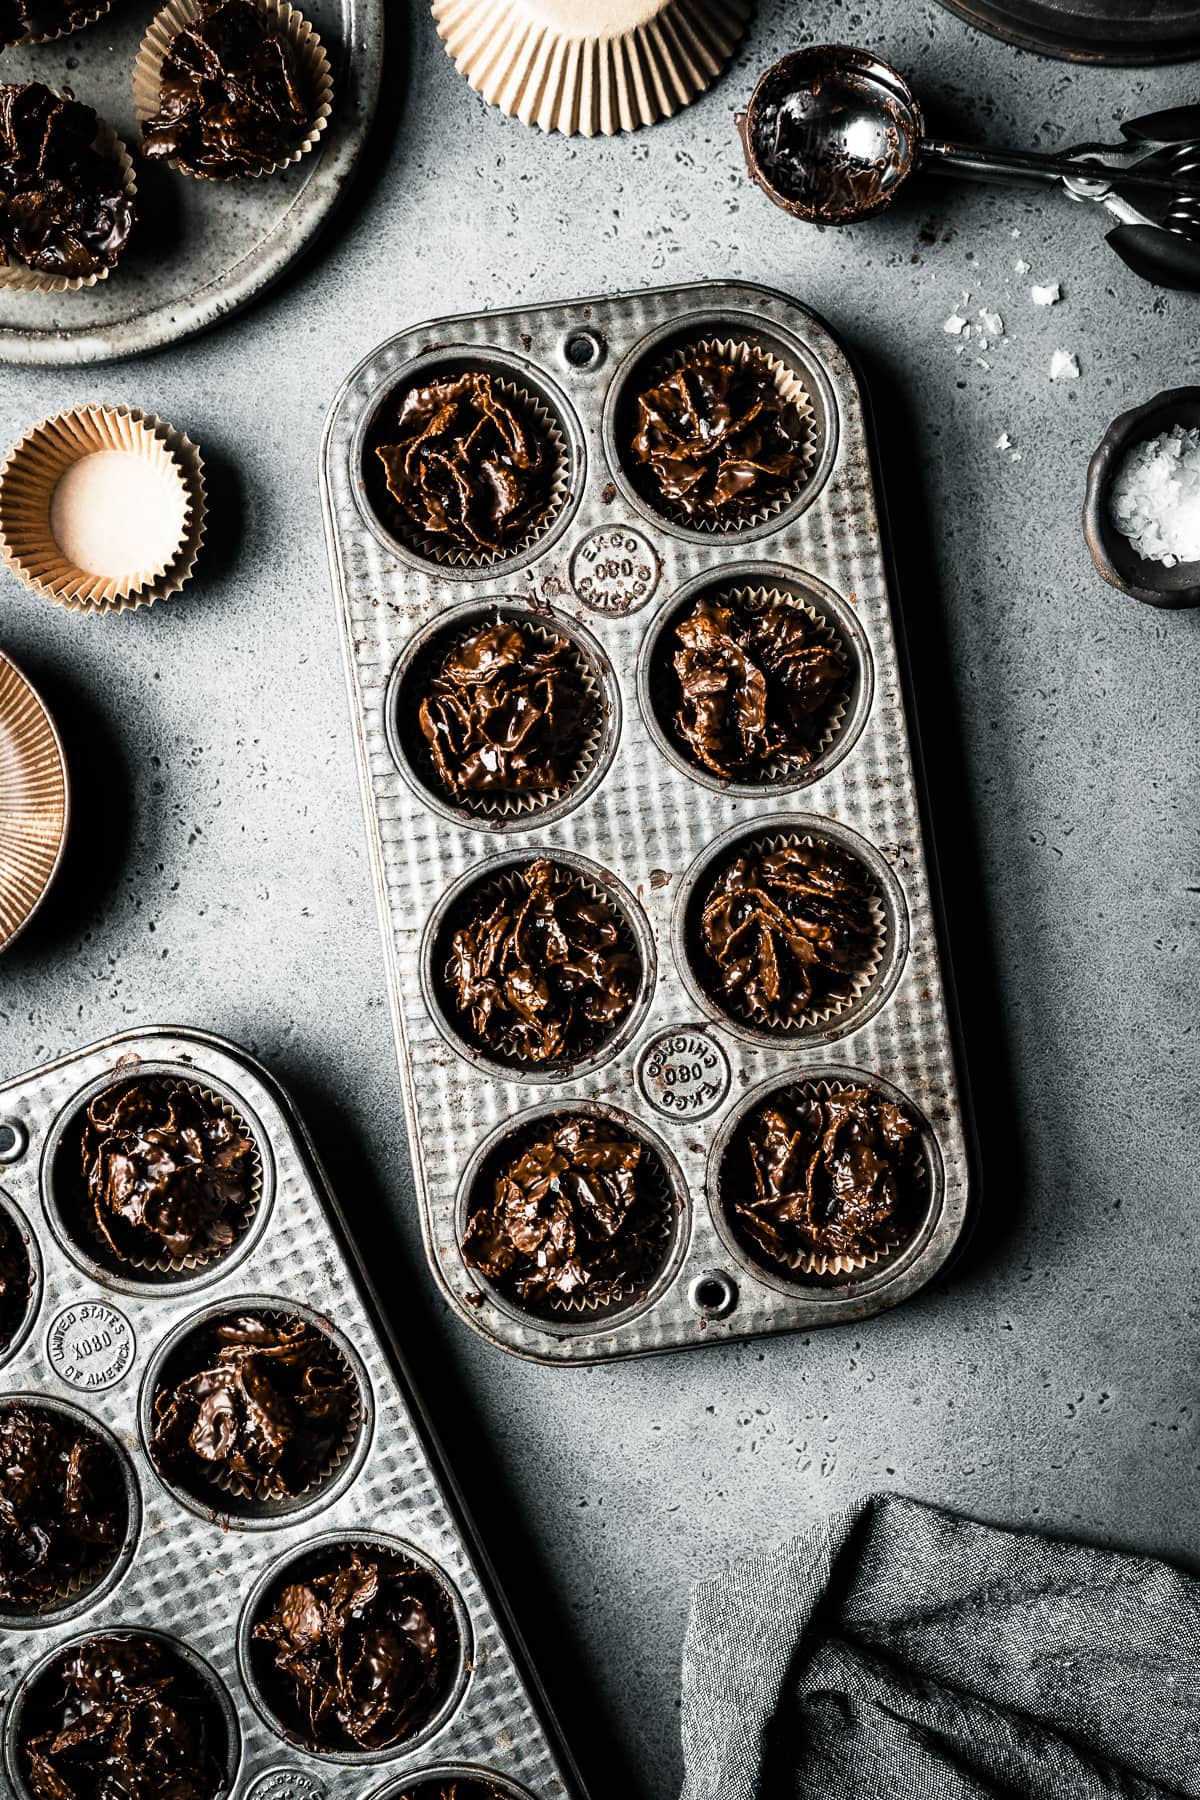 Two vintage mini muffin tins hold chocolate covered cornflake cereal, called roses de sables. They rest on a grey stone surface and are surrounded by brown bowls, brown paper muffin liners, a cookie scoop and a pinch bowl of flaky sea salt.